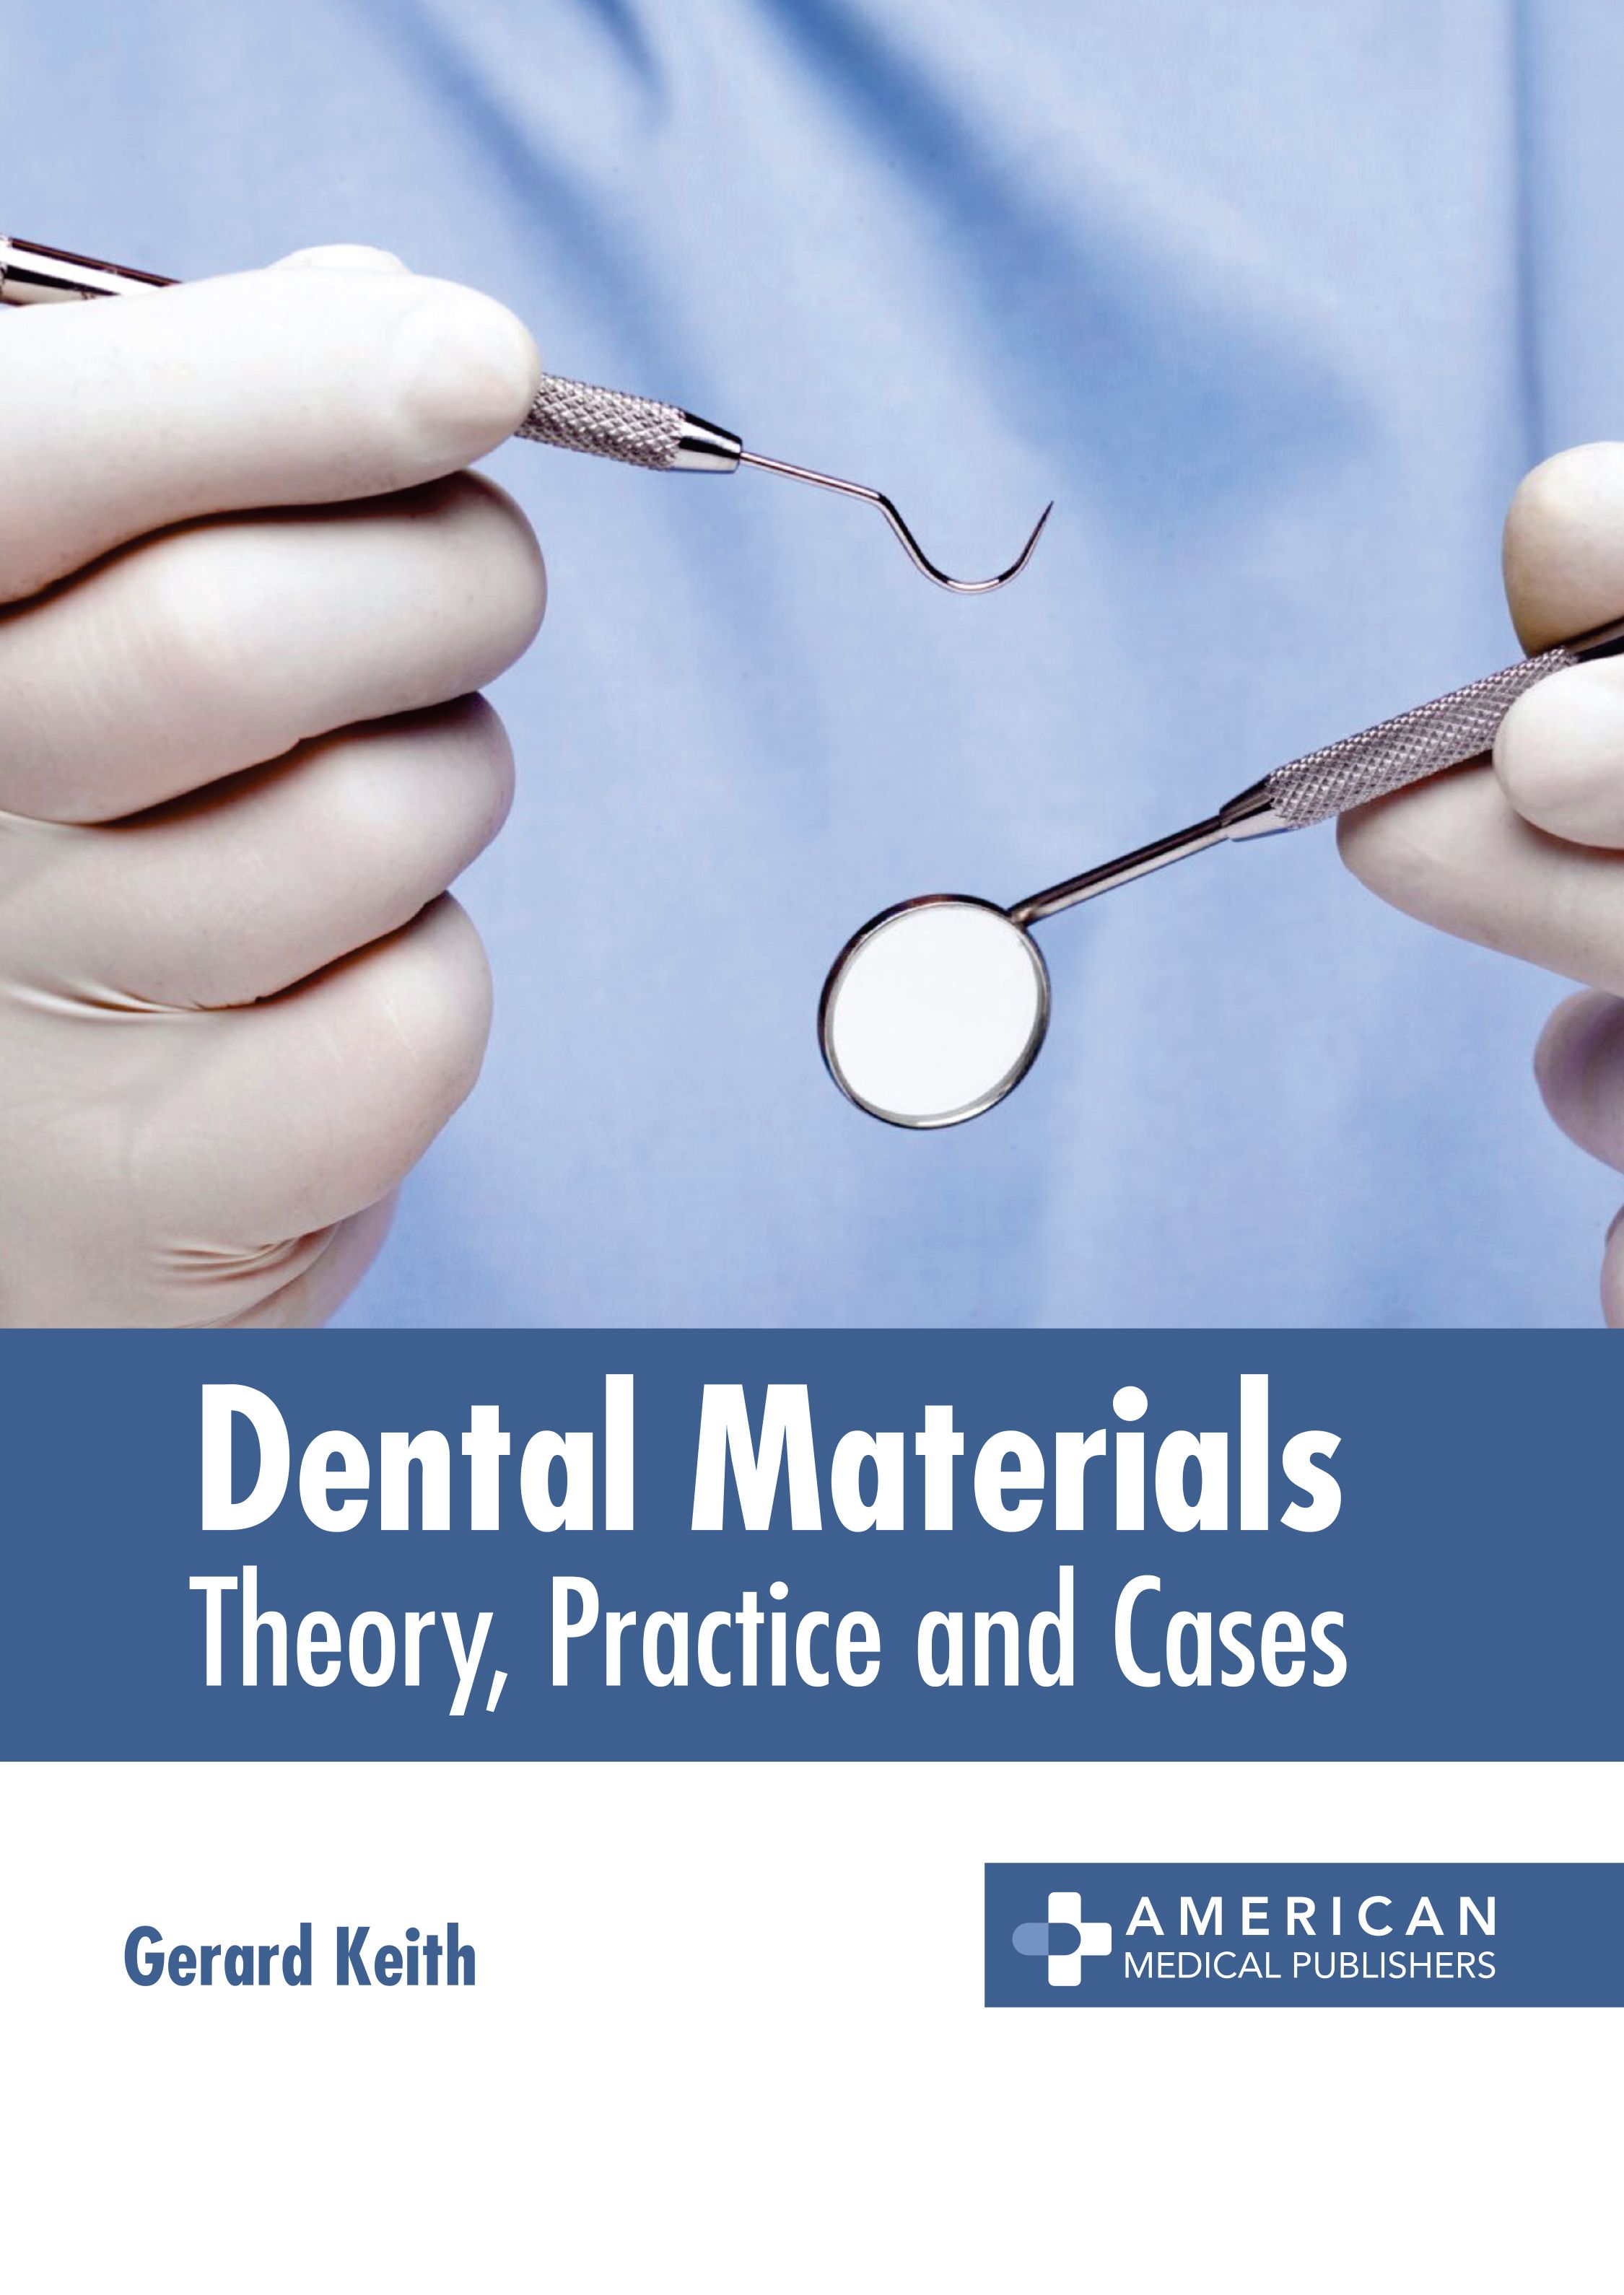 DENTAL MATERIALS: THEORY, PRACTICE AND CASES